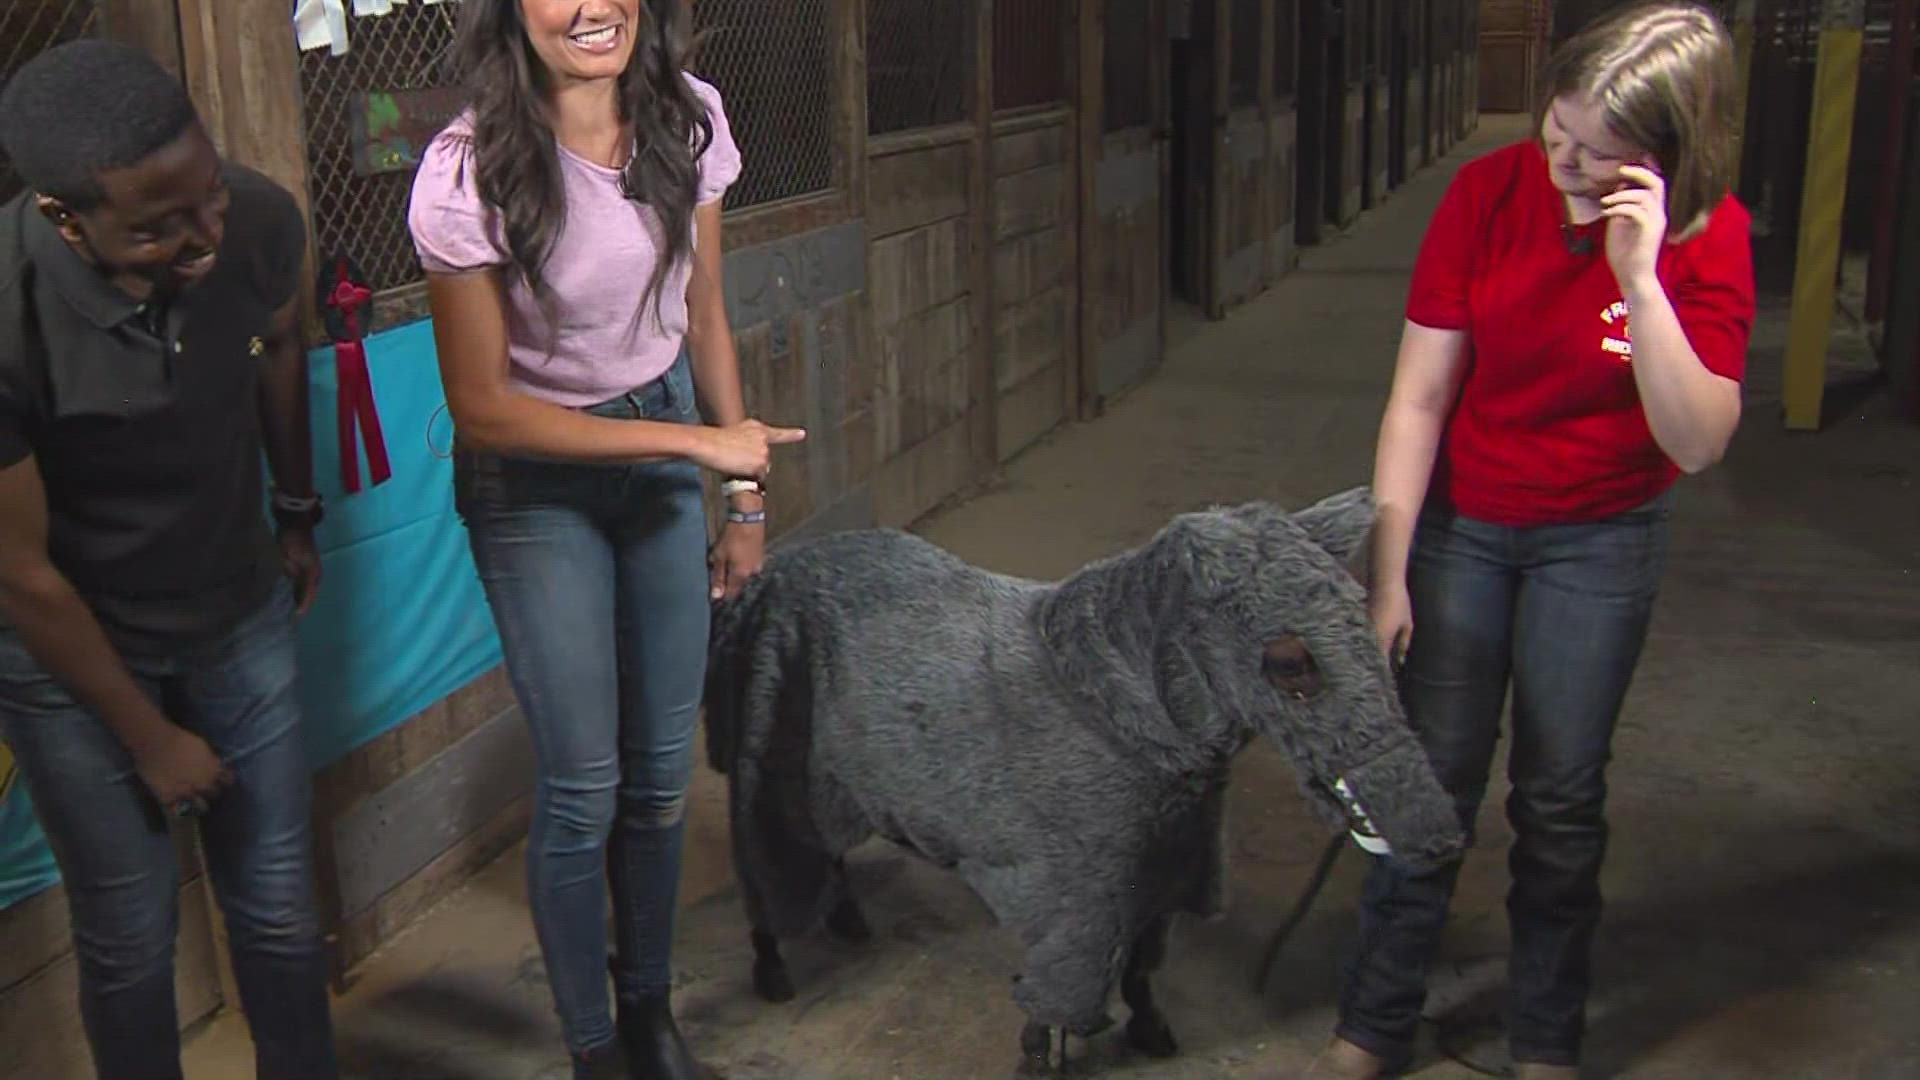 The "Good Morning Iowa" team dressed a 21-year-old miniature horse as a wolf. It's one of the costumes the horse wears when competing.